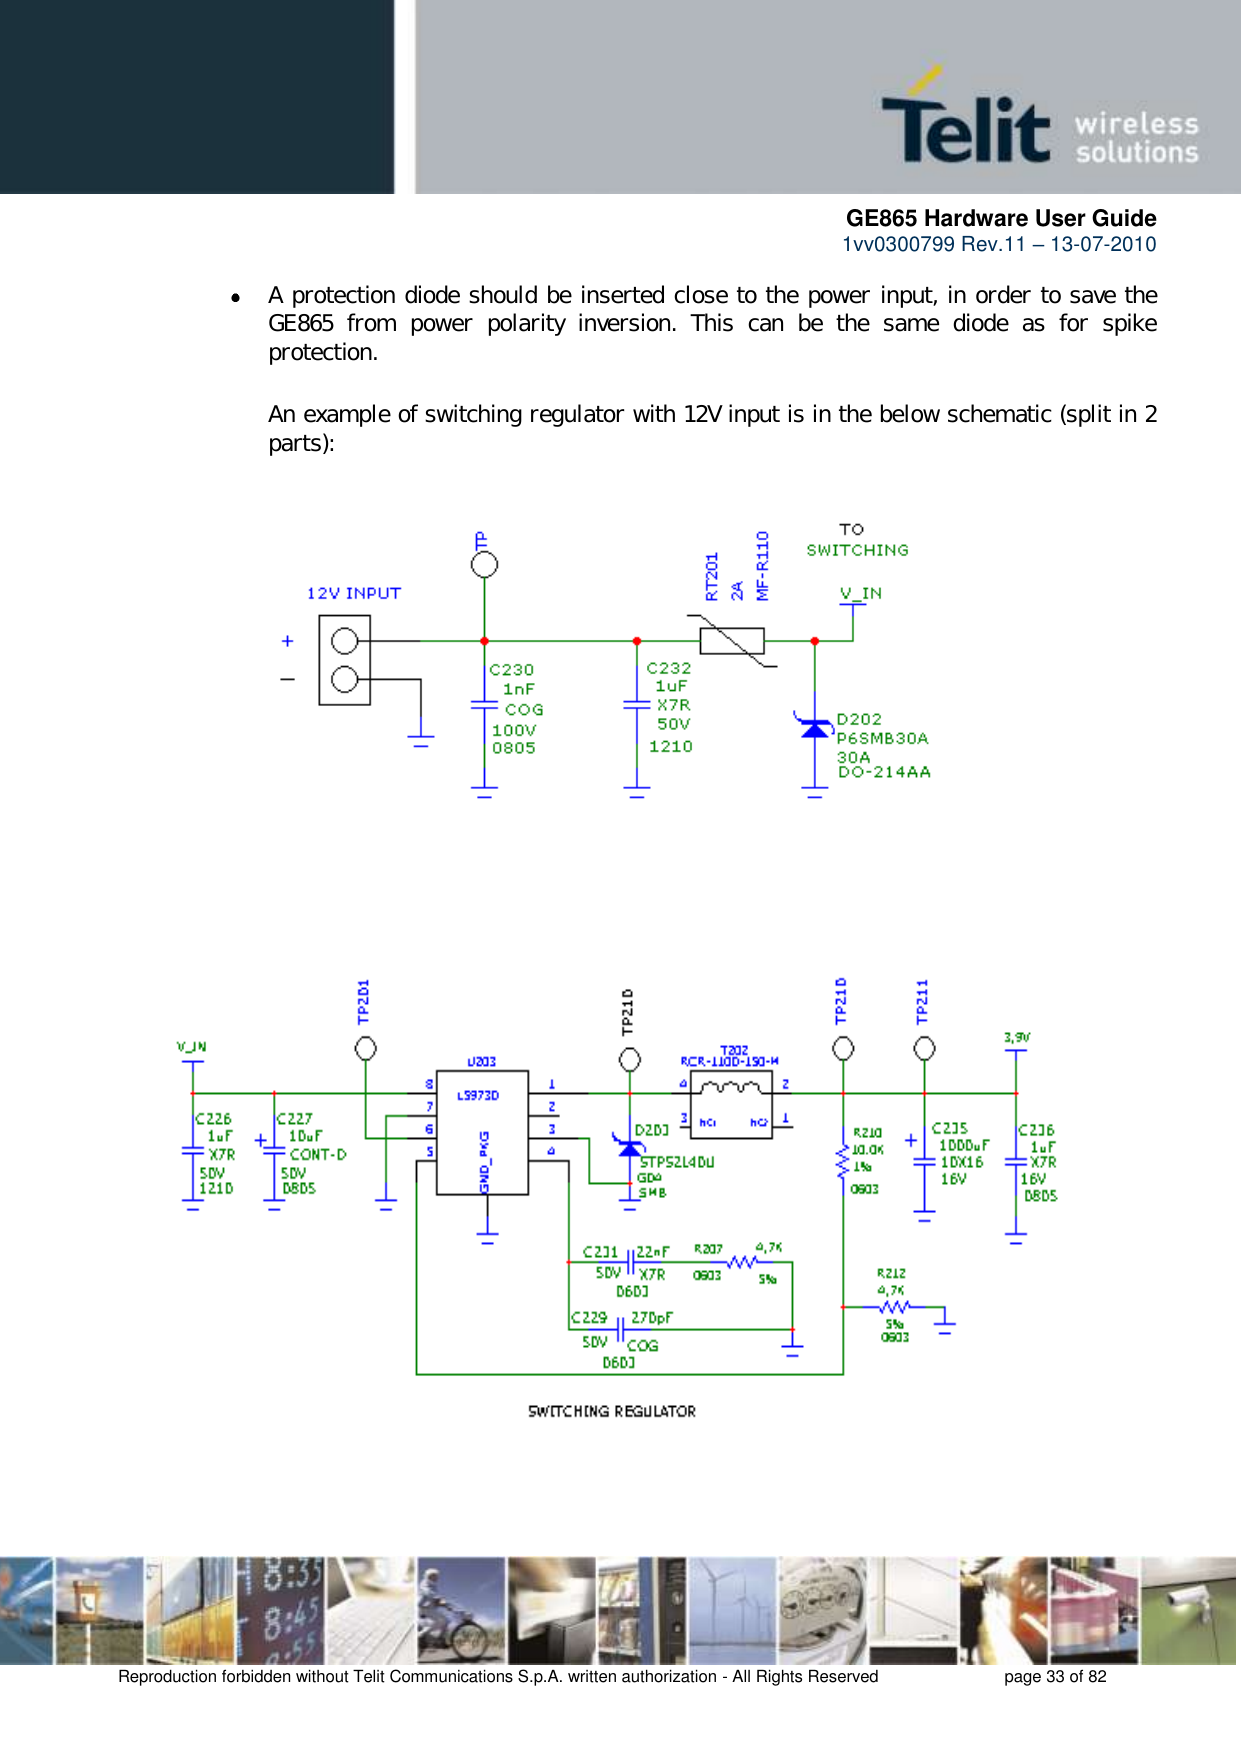      GE865 Hardware User Guide 1vv0300799 Rev.11 – 13-07-2010       Reproduction forbidden without Telit Communications S.p.A. written authorization - All Rights Reserved    page 33 of 82   A protection diode should be inserted close to the power input, in order to save the GE865  from  power  polarity  inversion.  This  can  be  the  same  diode  as  for  spike protection.  An example of switching regulator with 12V input is in the below schematic (split in 2 parts):                             